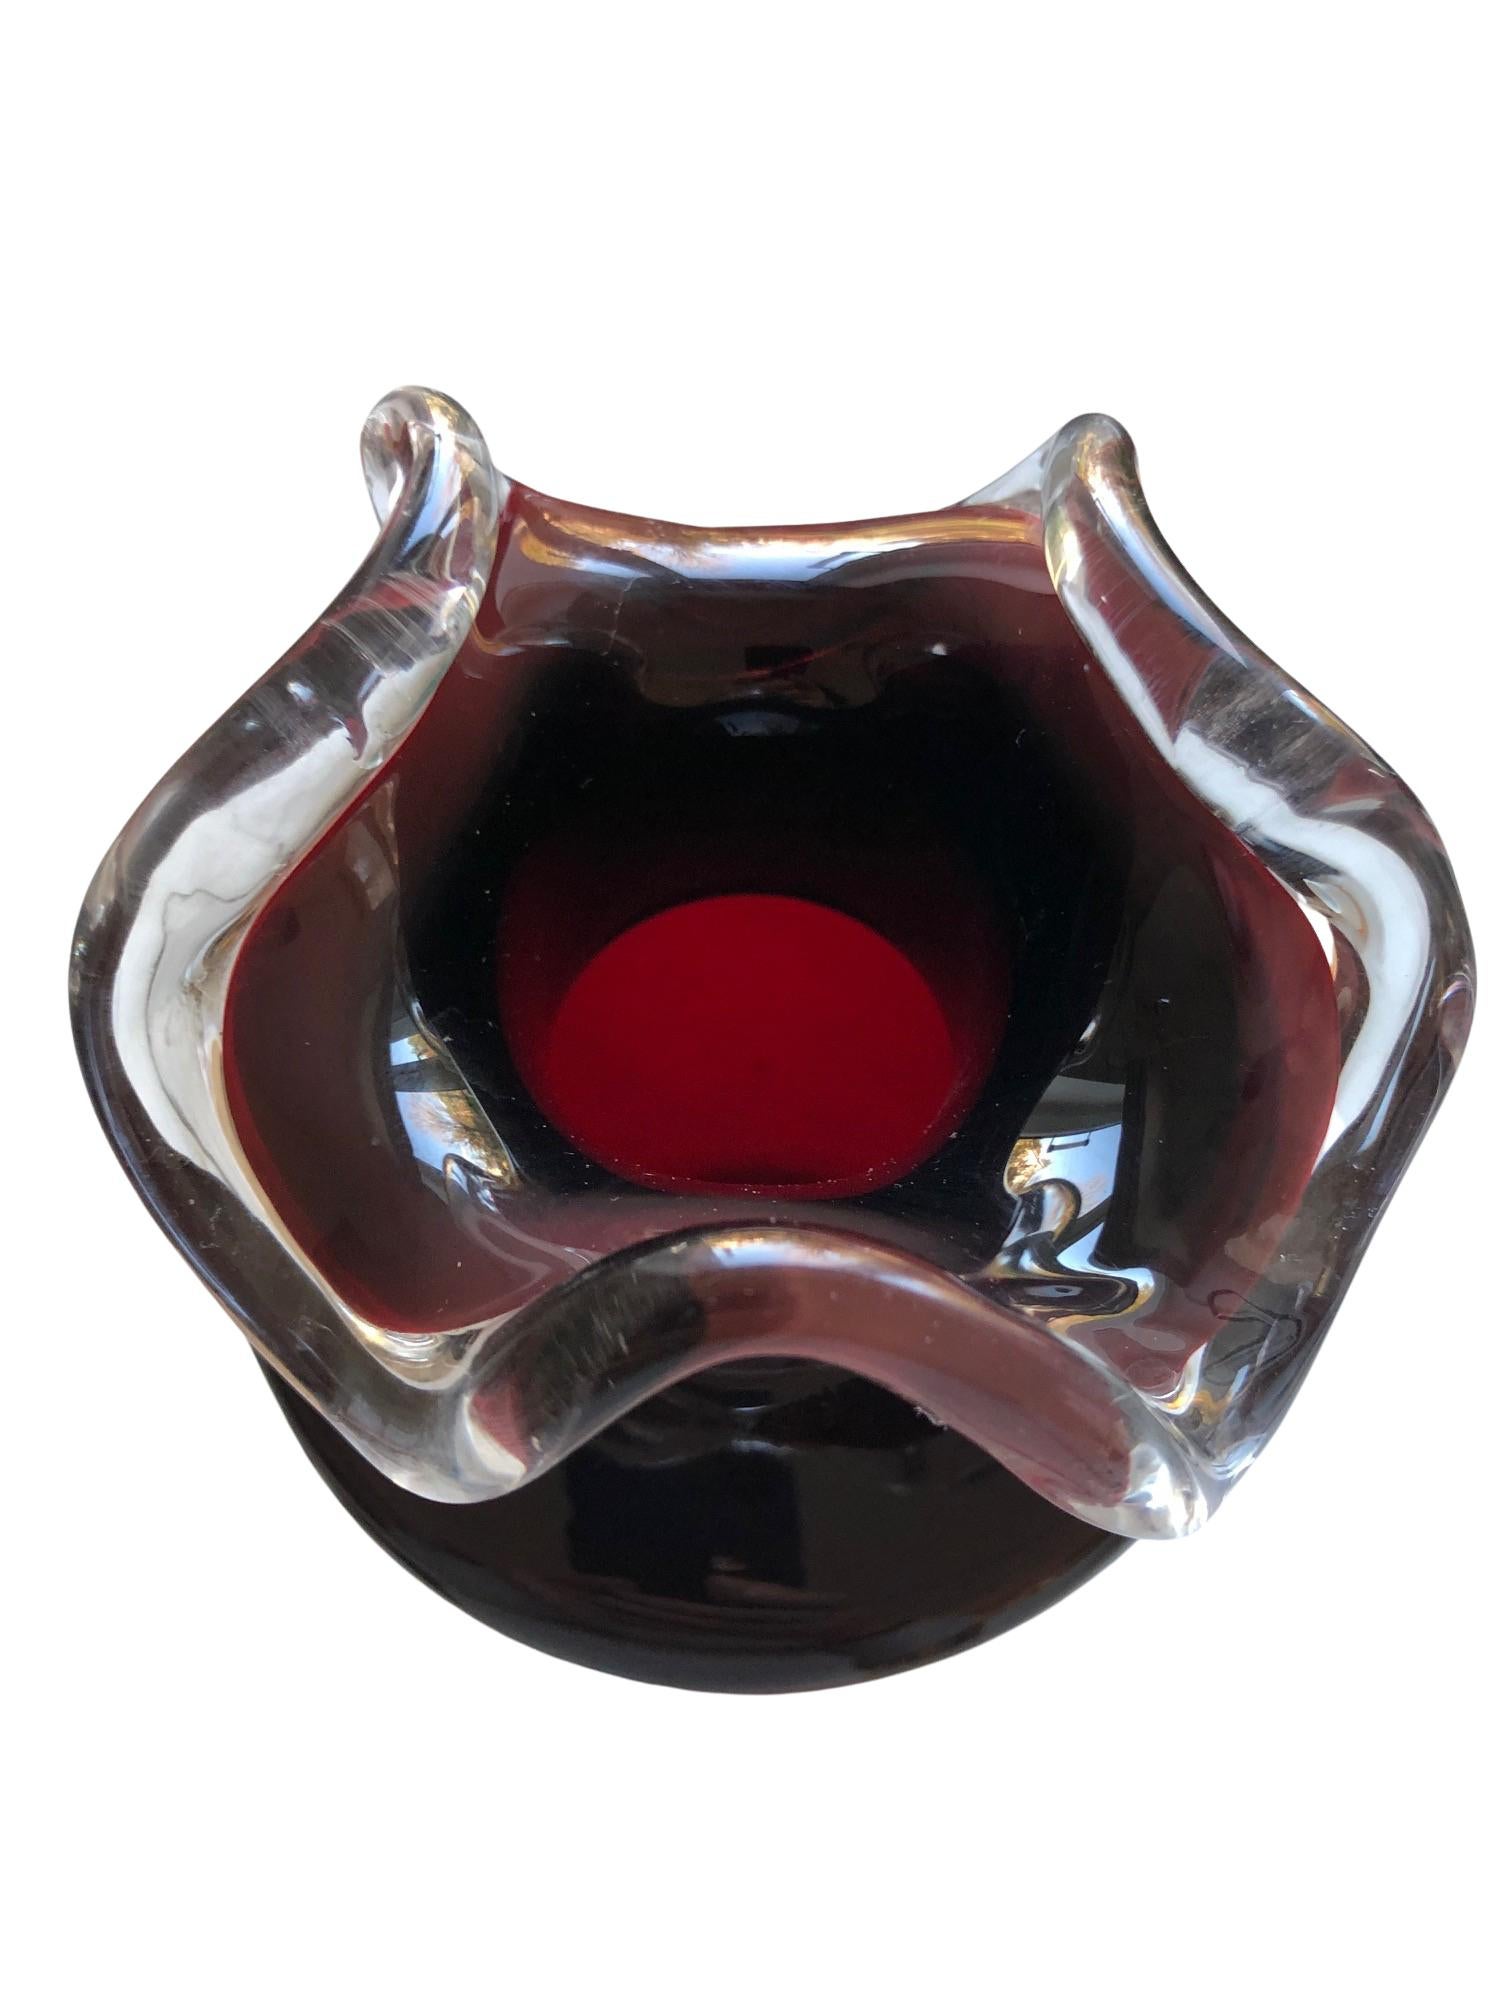 Hand-Carved Large Burgundy Vase with a Frill, Tarnowiec Glassworks, Poland, 1970s For Sale